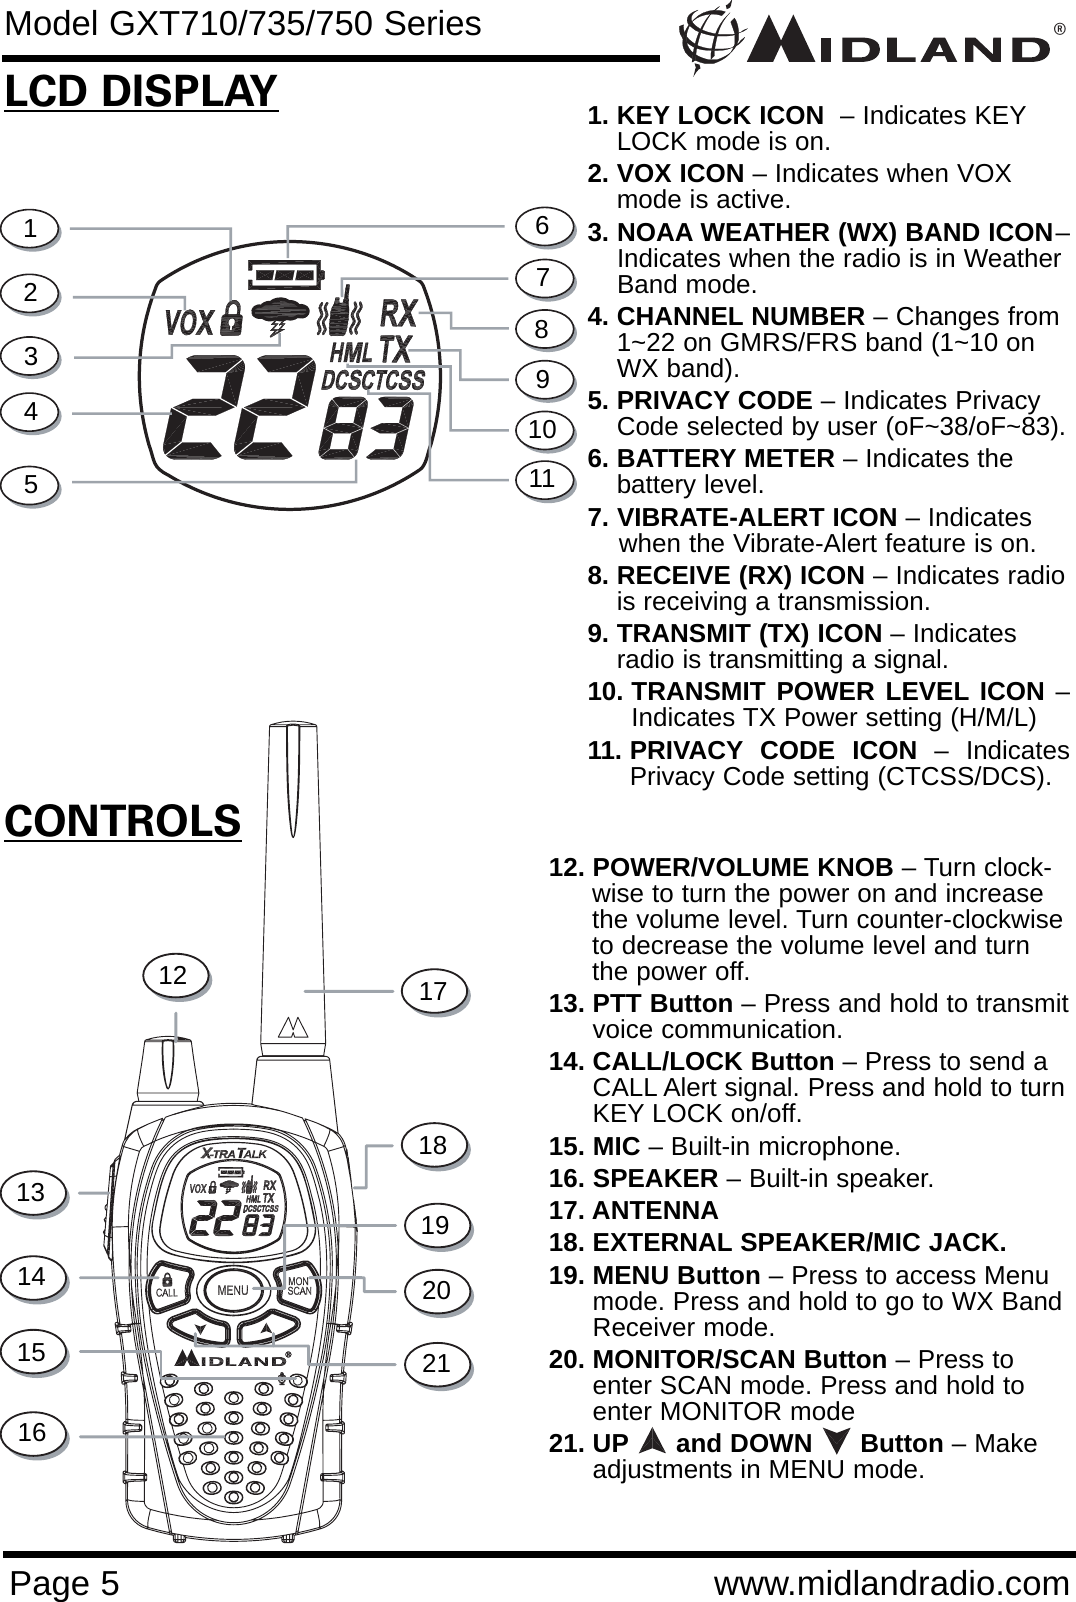 ®Page 5 www.midlandradio.comCONTROLSLCD DISPLAY1. KEY LOCK ICON  – Indicates KEYLOCK mode is on.2. VOX ICON – Indicates when VOXmode is active.3. NOAA WEATHER (WX) BAND ICON–Indicates when the radio is in Weather Band mode.4. CHANNEL NUMBER – Changes from1~22 on GMRS/FRS band (1~10 onWX band).5. PRIVACY CODE – Indicates PrivacyCode selected by user (oF~38/oF~83).6. BATTERY METER – Indicates thebattery level.7. VIBRATE-ALERT ICON – Indicates when the Vibrate-Alert feature is on.  8. RECEIVE (RX) ICON – Indicates radiois receiving a transmission. 9. TRANSMIT (TX) ICON – Indicatesradio is transmitting a signal.10. TRANSMIT POWER LEVEL ICON –Indicates TX Power setting (H/M/L)11. PRIVACY CODE ICON – IndicatesPrivacy Code setting (CTCSS/DCS).12. POWER/VOLUME KNOB – Turn clock-wise to turn the power on and increasethe volume level. Turn counter-clockwiseto decrease the volume level and turnthe power off.13. PTT Button – Press and hold to transmitvoice communication. 14. CALL/LOCK Button – Press to send aCALL Alert signal. Press and hold to turnKEY LOCK on/off.15. MIC – Built-in microphone.16. SPEAKER – Built-in speaker.17. ANTENNA18. EXTERNAL SPEAKER/MIC JACK.19. MENU Button – Press to access Menumode. Press and hold to go to WX BandReceiver mode.20. MONITOR/SCAN Button – Press toenter SCAN mode. Press and hold toenter MONITOR mode21. UP and DOWN      Button – Makeadjustments in MENU mode.1234567891012131415162120191817Model GXT710/735/750 Series11